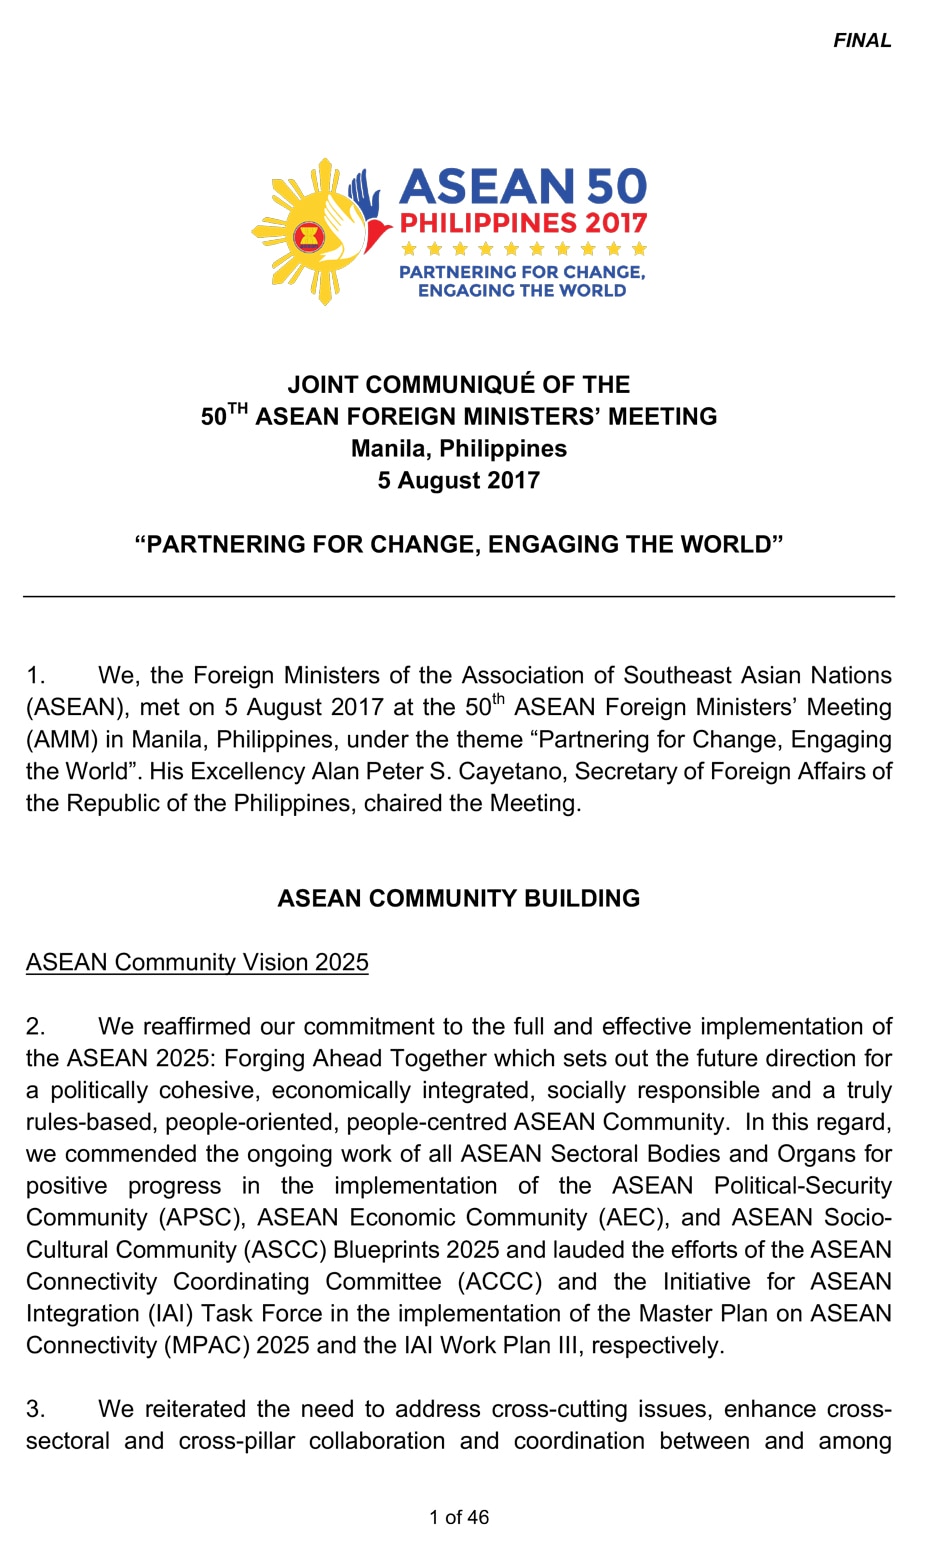 READ: 50th ASEAN Foreign Ministers Meeting Joint Communique 2